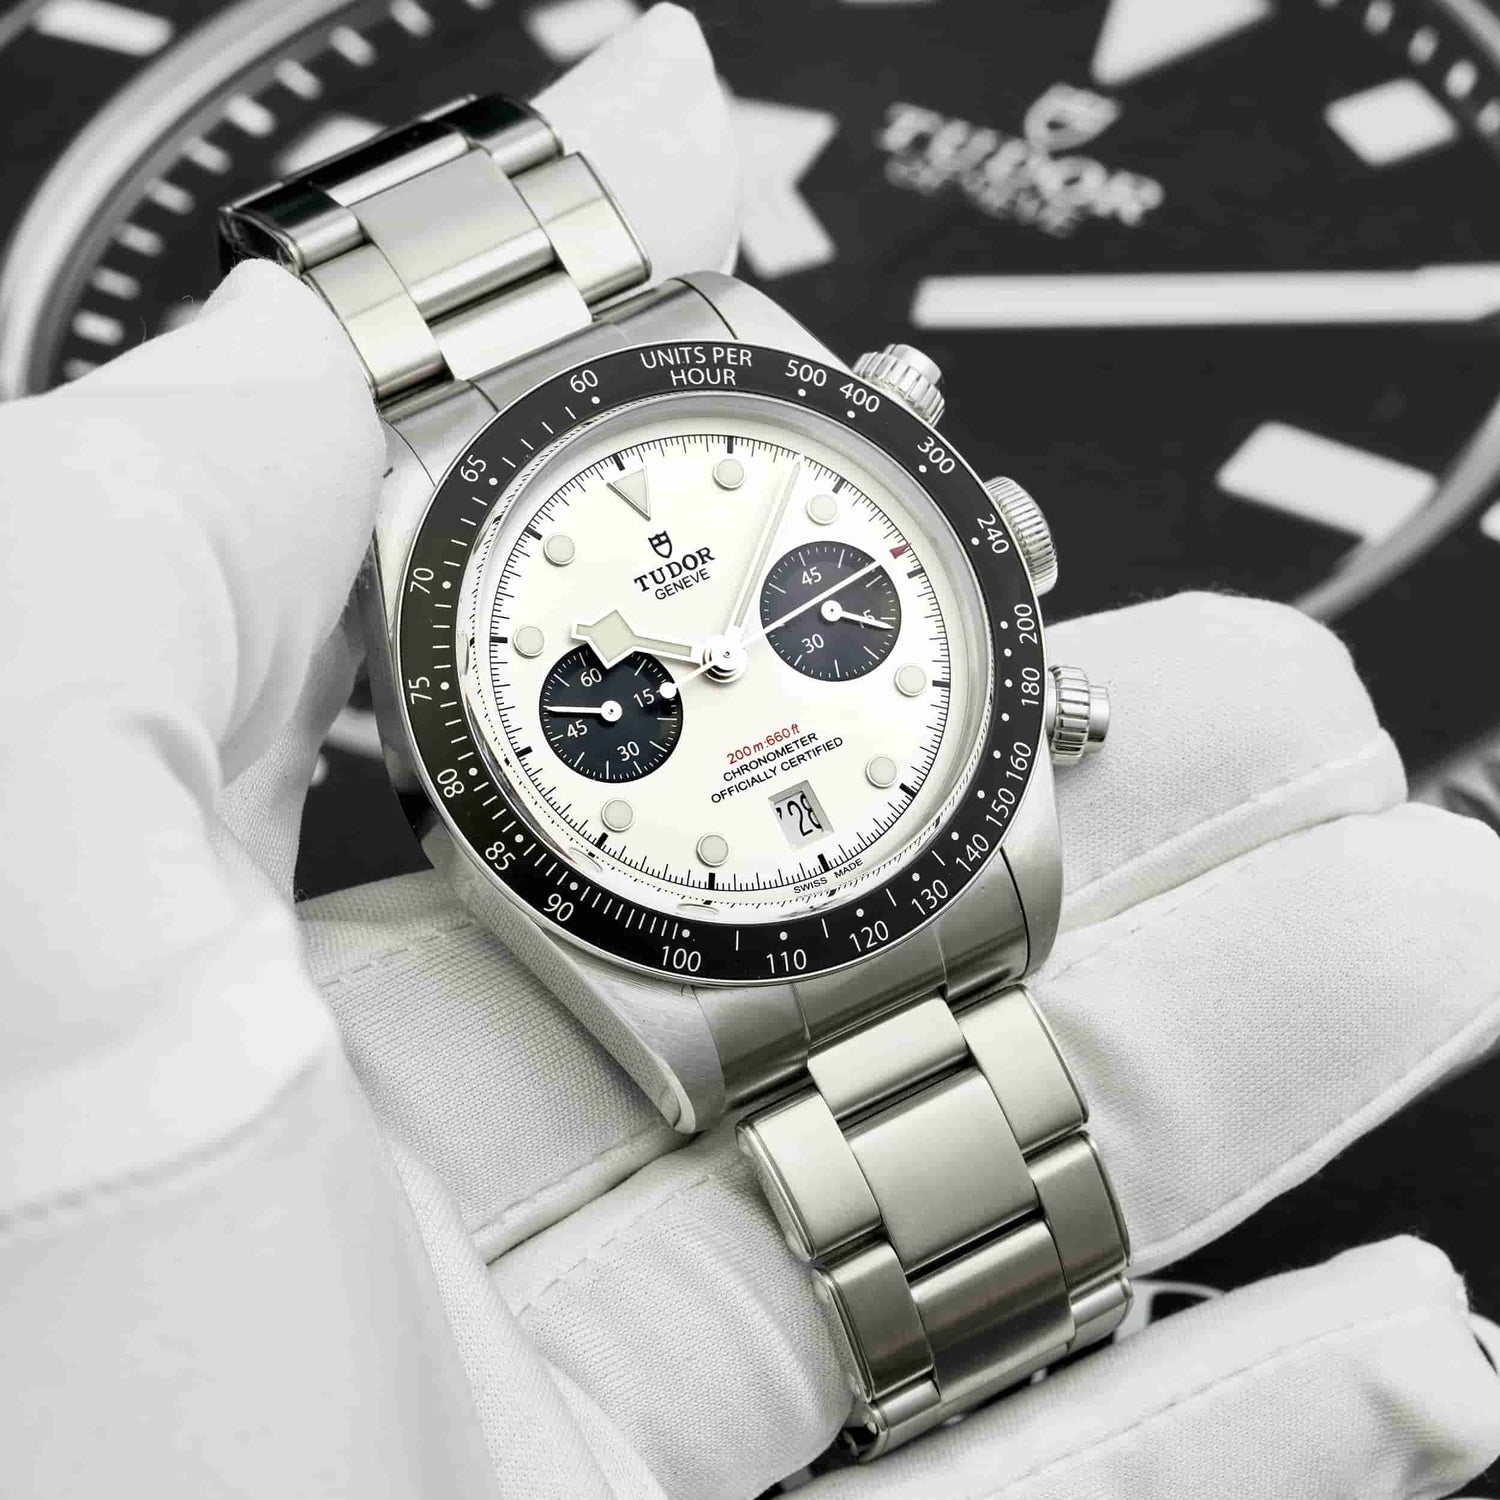 A TUDOR Watch With White Face and Black Dial Being Held By a White Glove